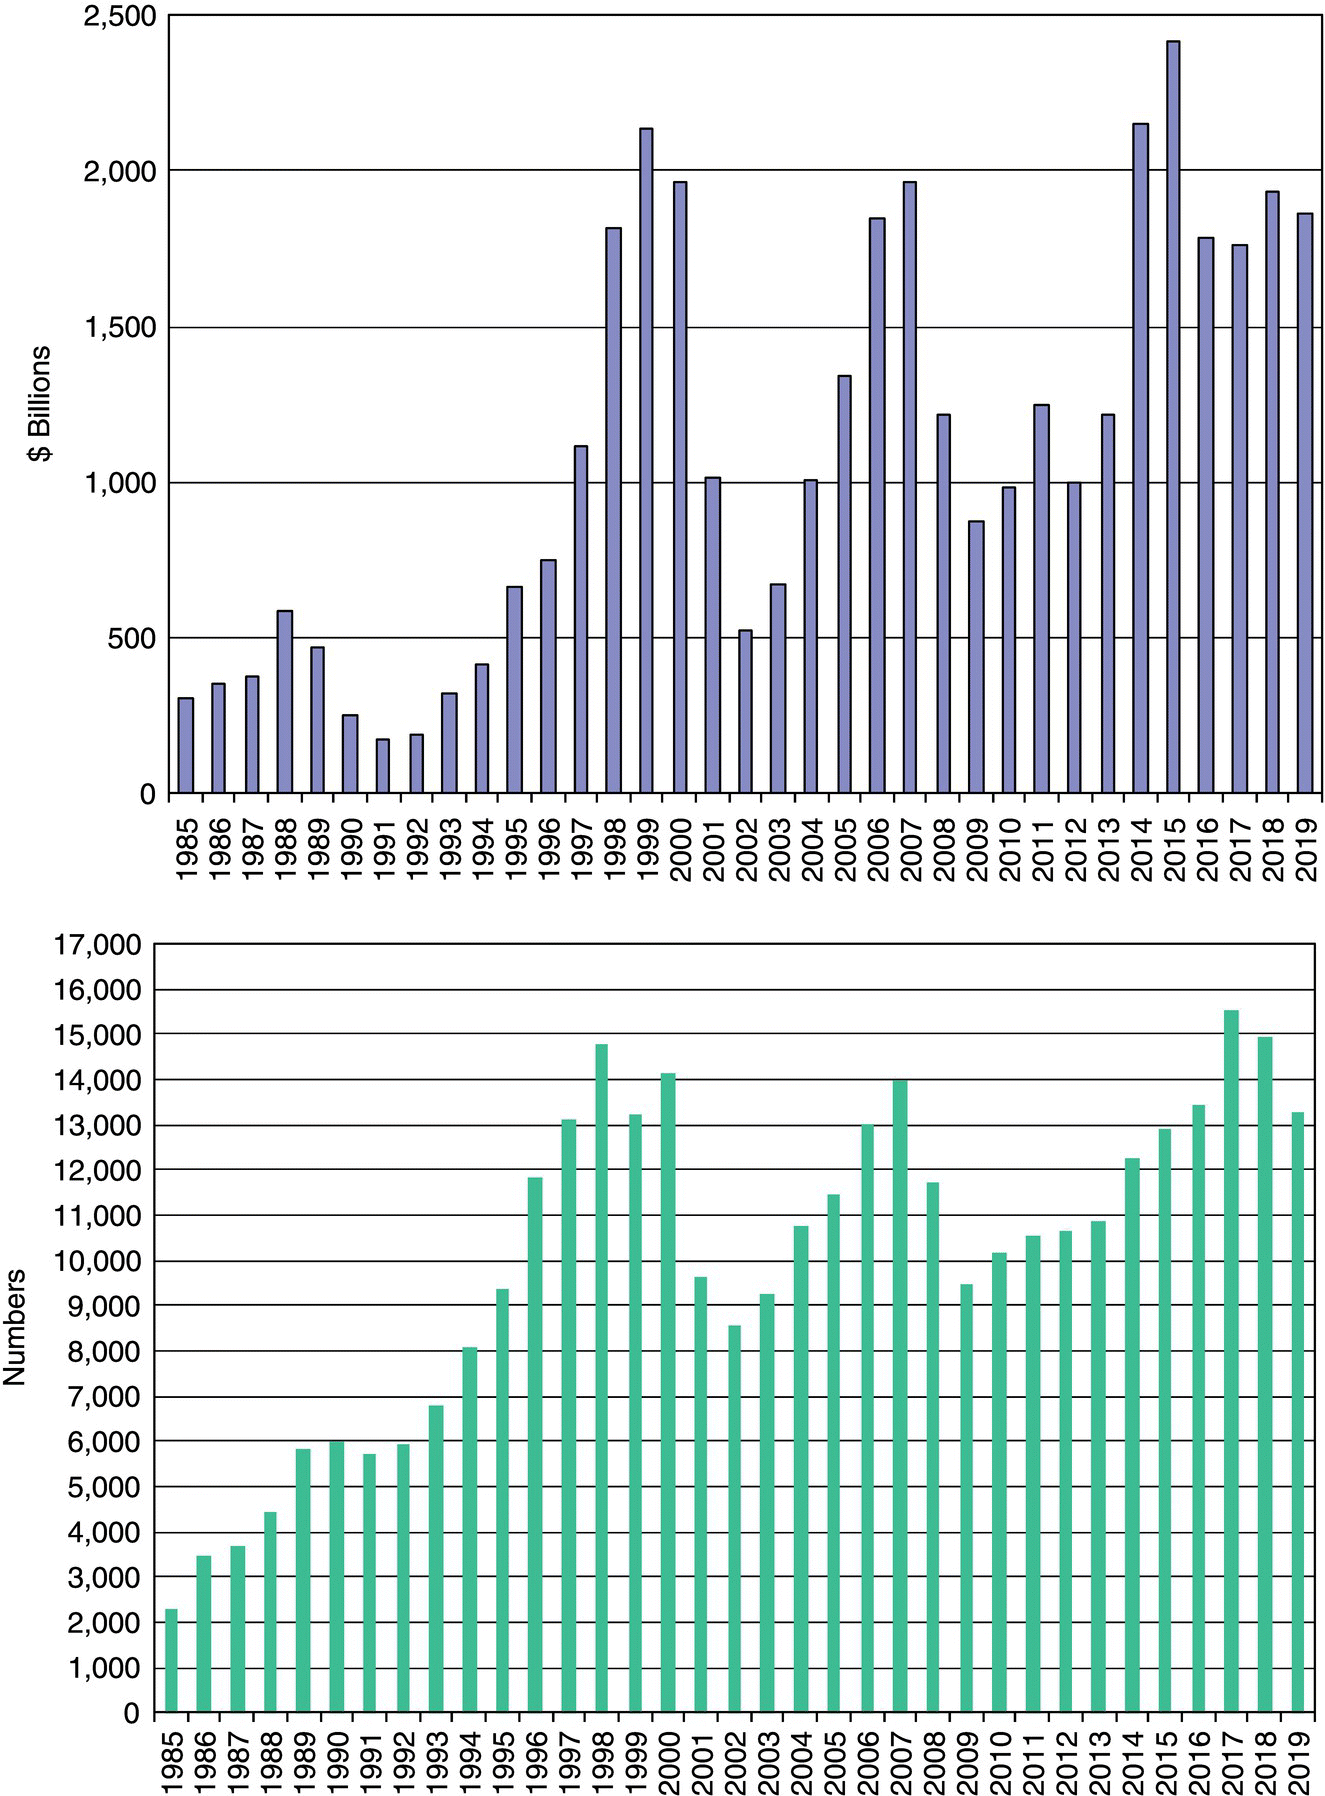 Top: Histogram depicting the dollar value of US from 1985 to 2019. Bottom: Histogram depicting the number of mergers and acquisitions from 1985 to 2019.